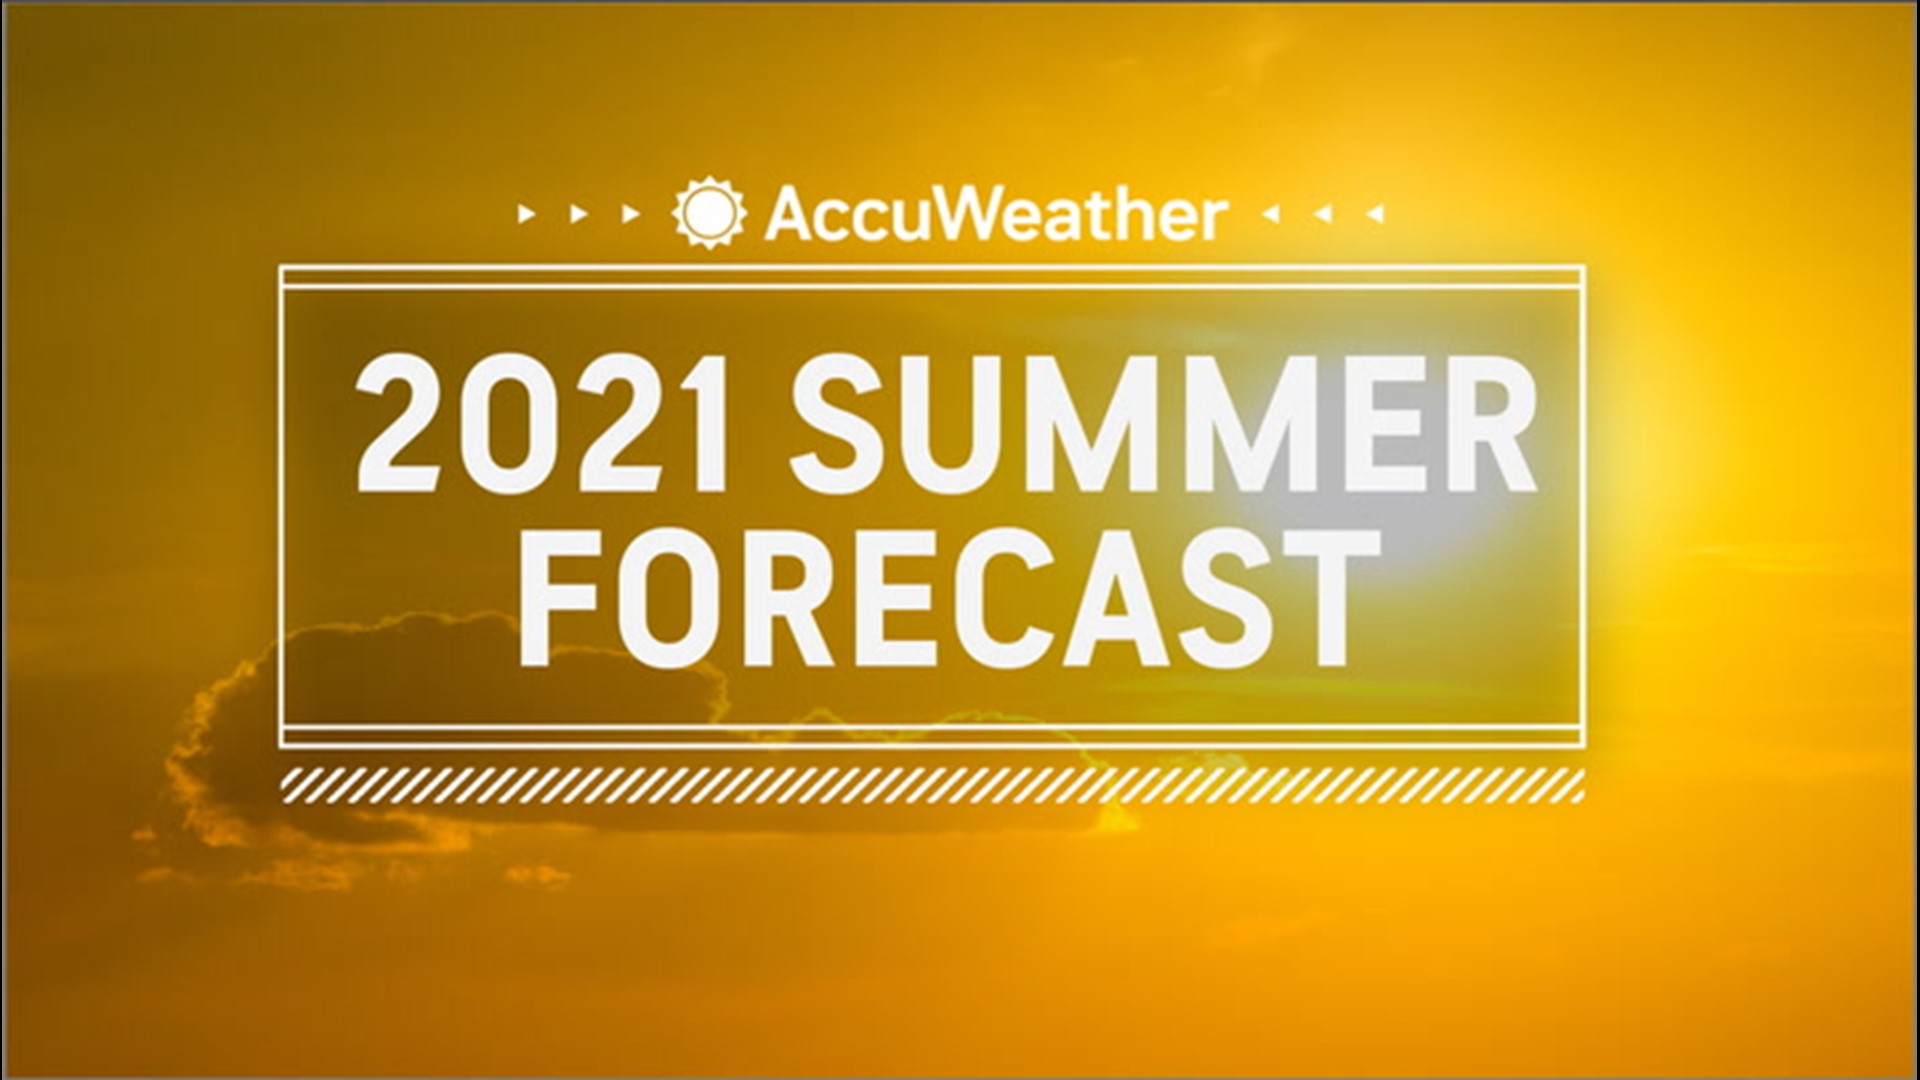 With the cold and snow behind us, AccuWeather's expert team of long-range forecasters are looking ahead to the summer months.